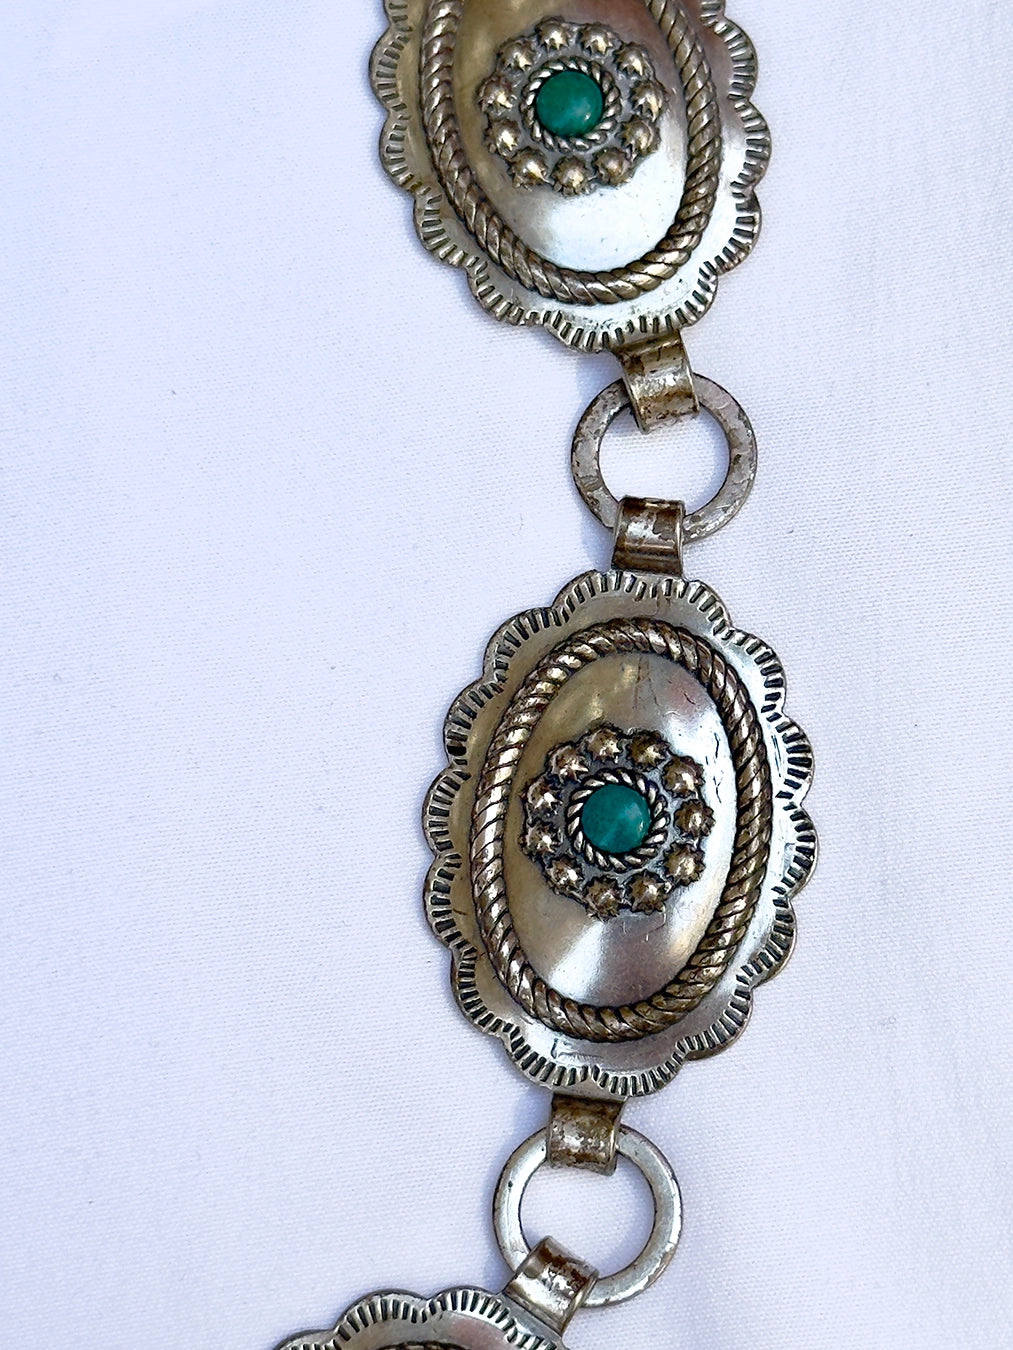 Vintage Silver and Turquoise Chain Belt